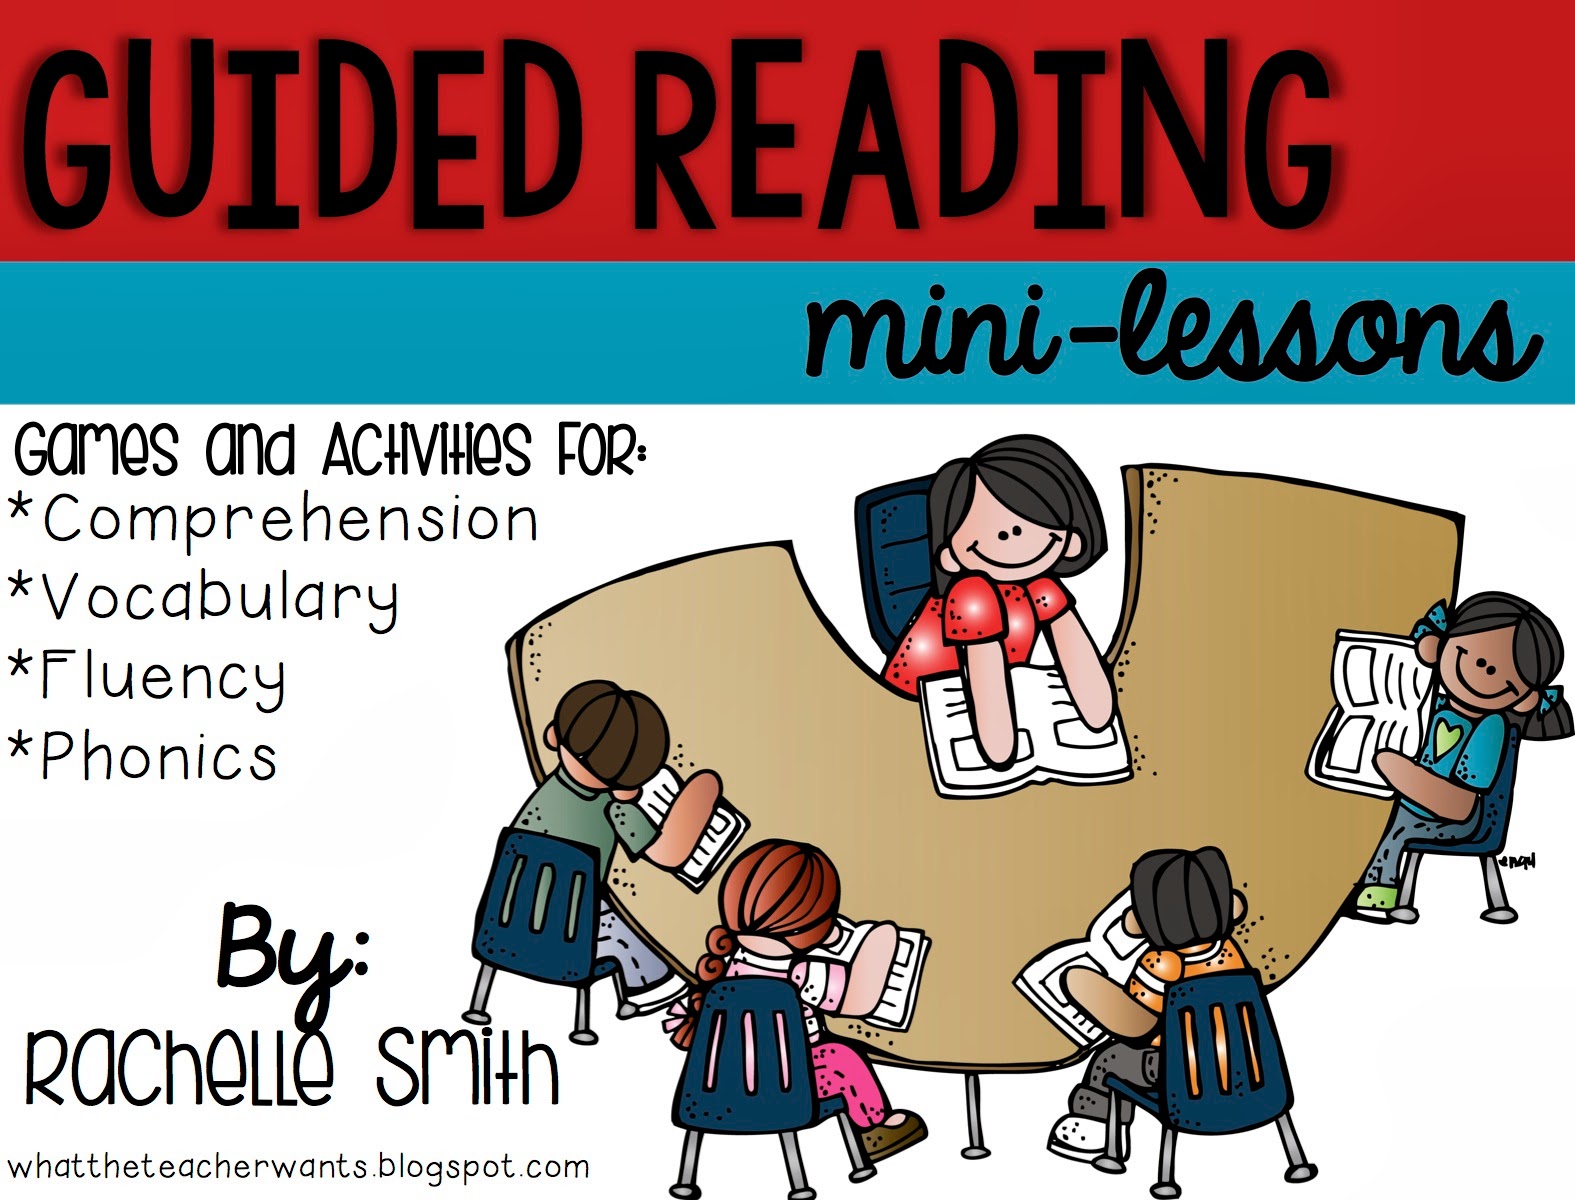 http://www.teacherspayteachers.com/Product/Guided-Reading-Mini-Lessons-Activities-Resources-and-Games-1140362